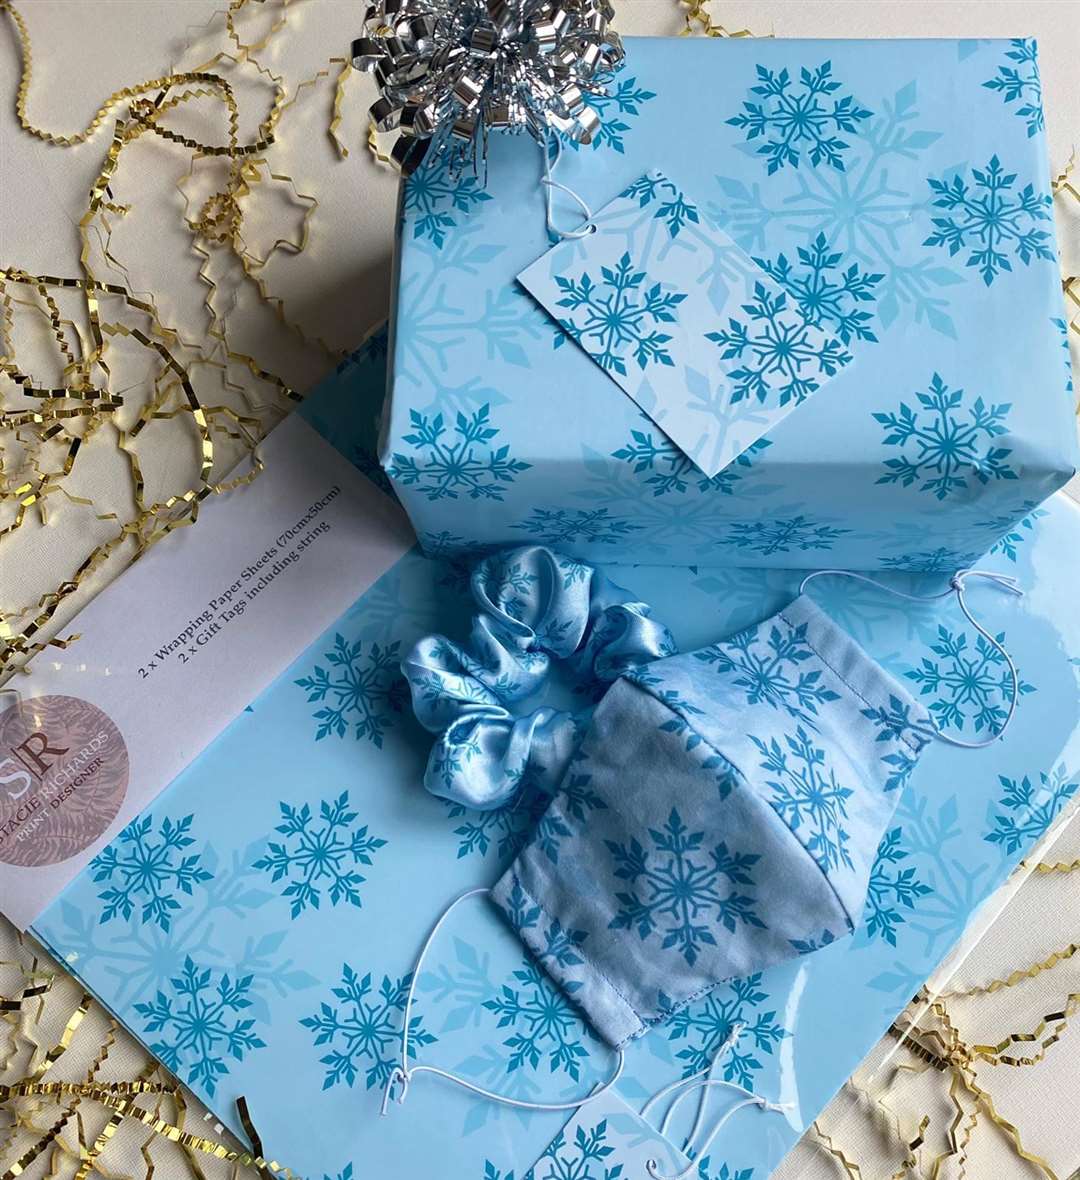 The 22 year old has a line of Christmas wrapping paper available. Picture: Stacie Richards